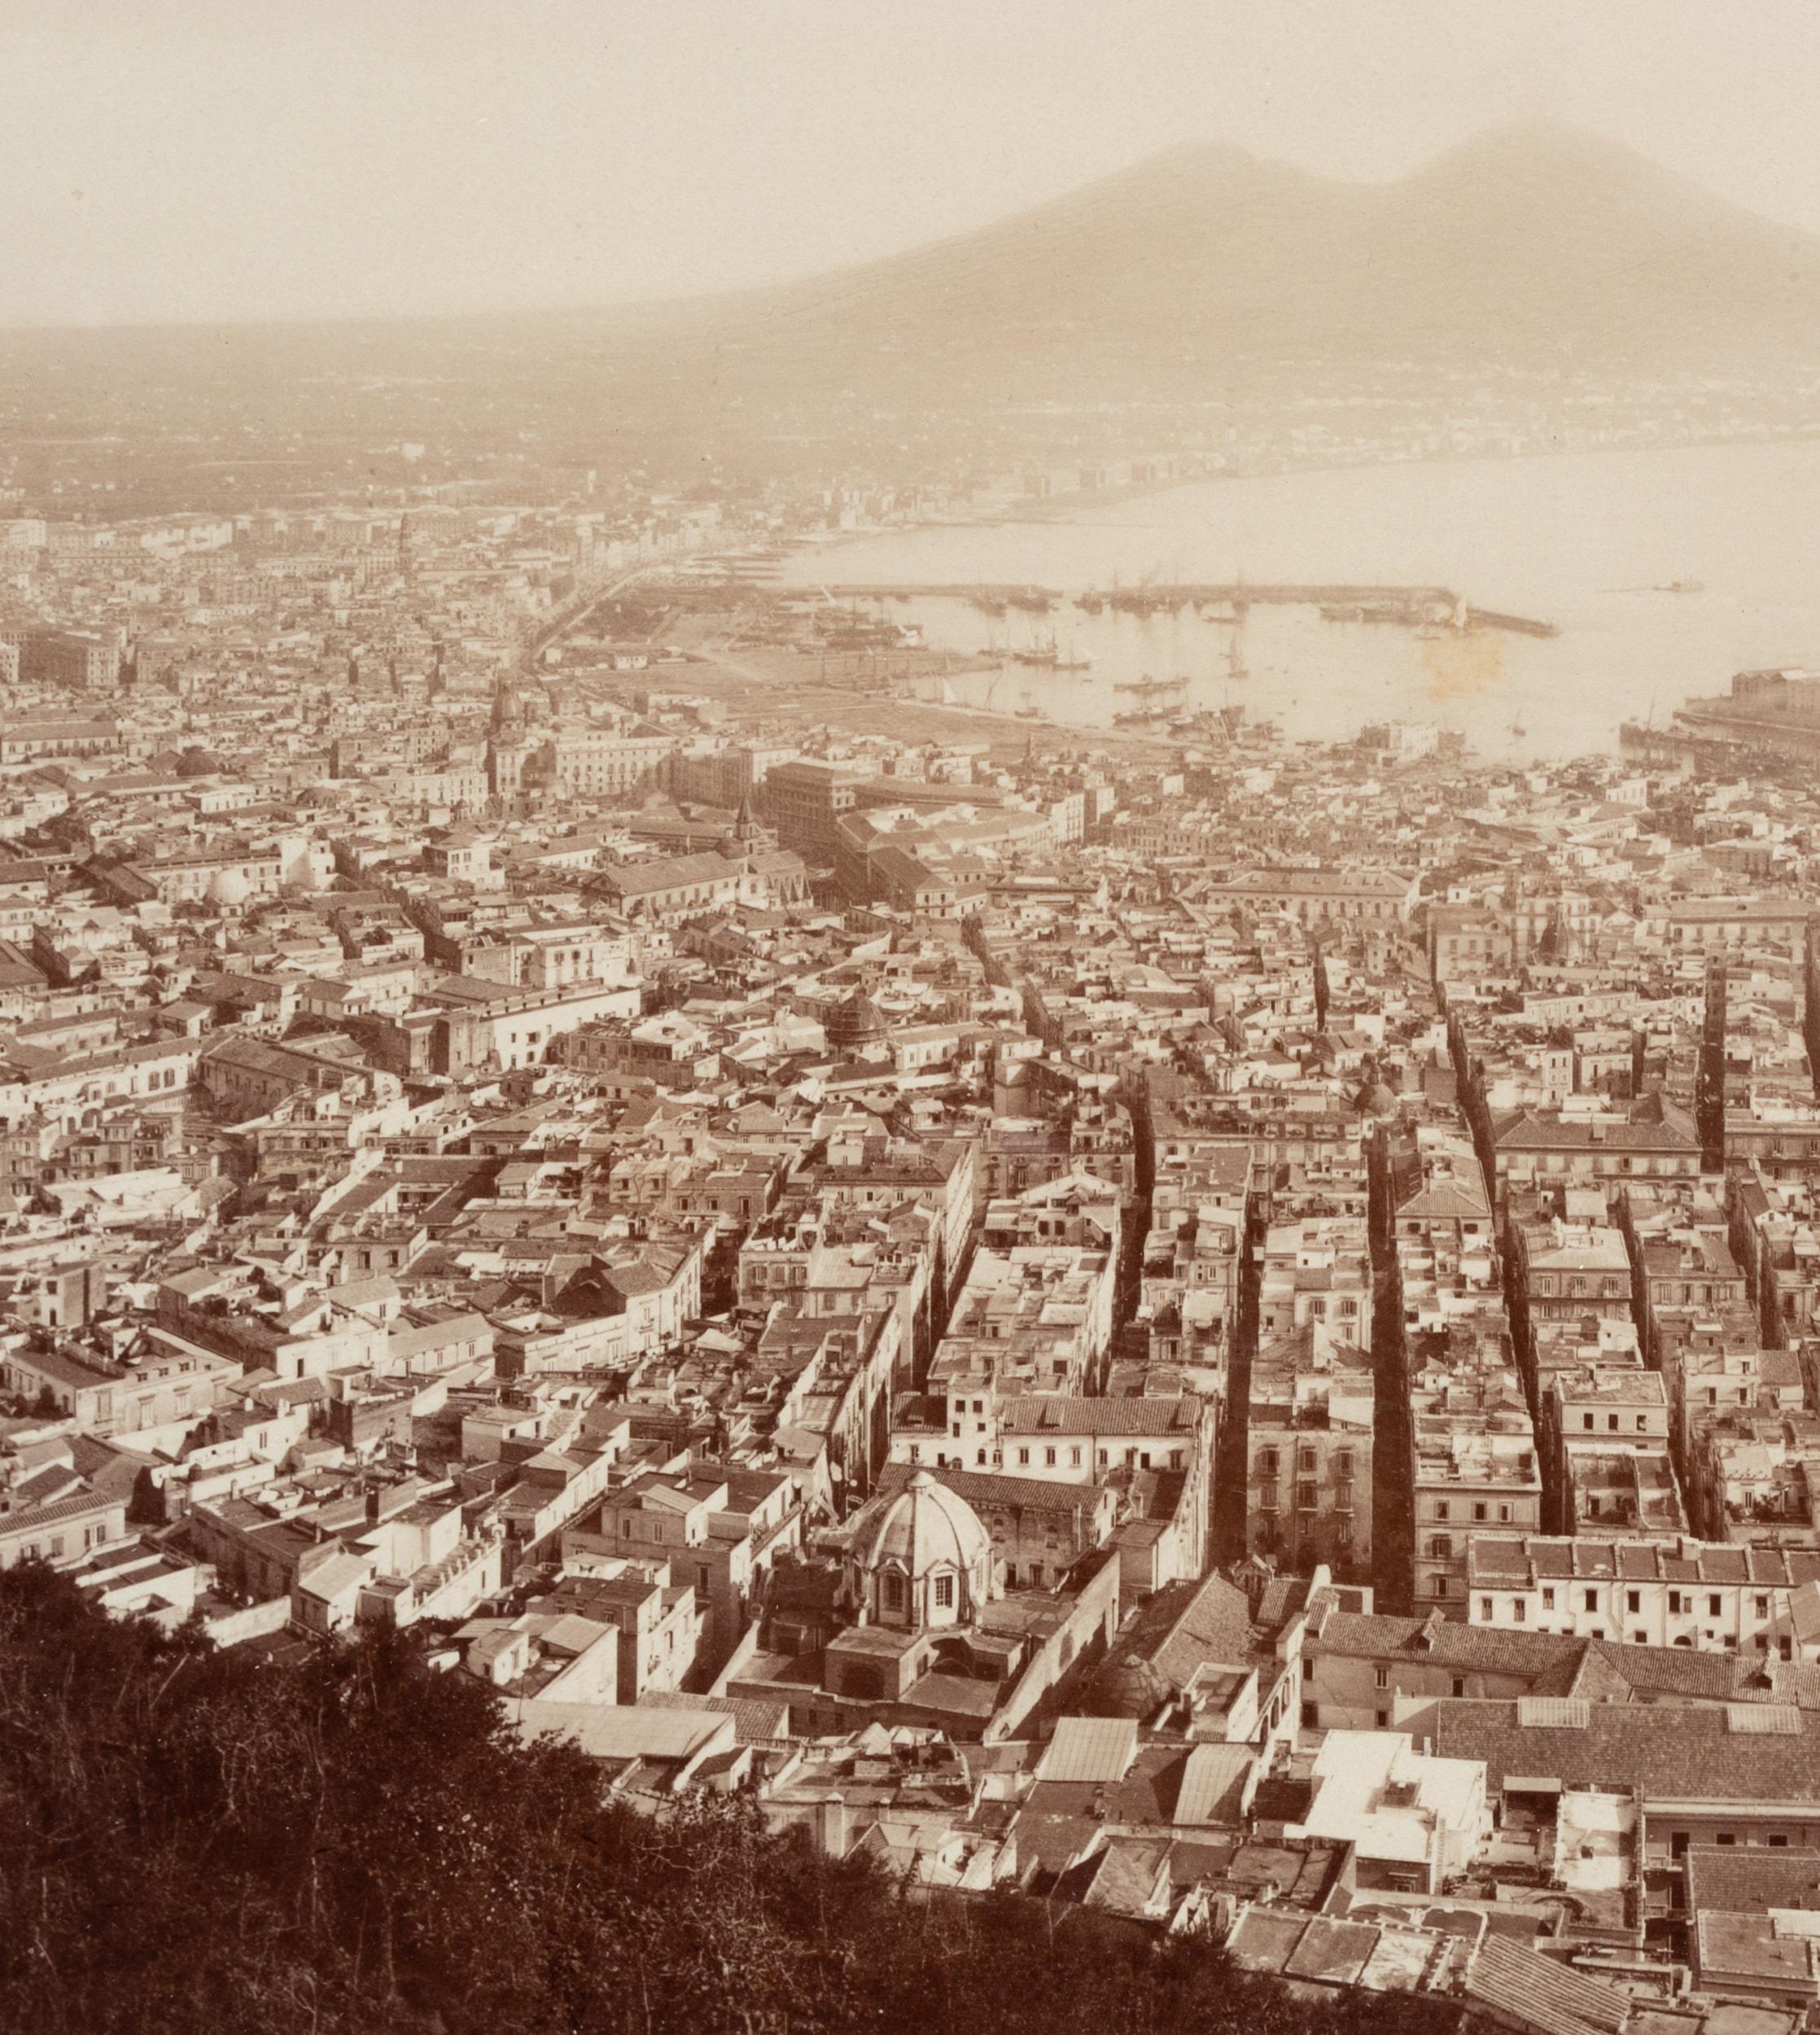 Fratelli Alinari (19th century): Panoramic view from San Martino of the city of Naples, the coast and Visuv in the distance, c. 1880, albumen paper print

Technique: albumen paper print

Inscription: Lower middle signed in the printing plate: 